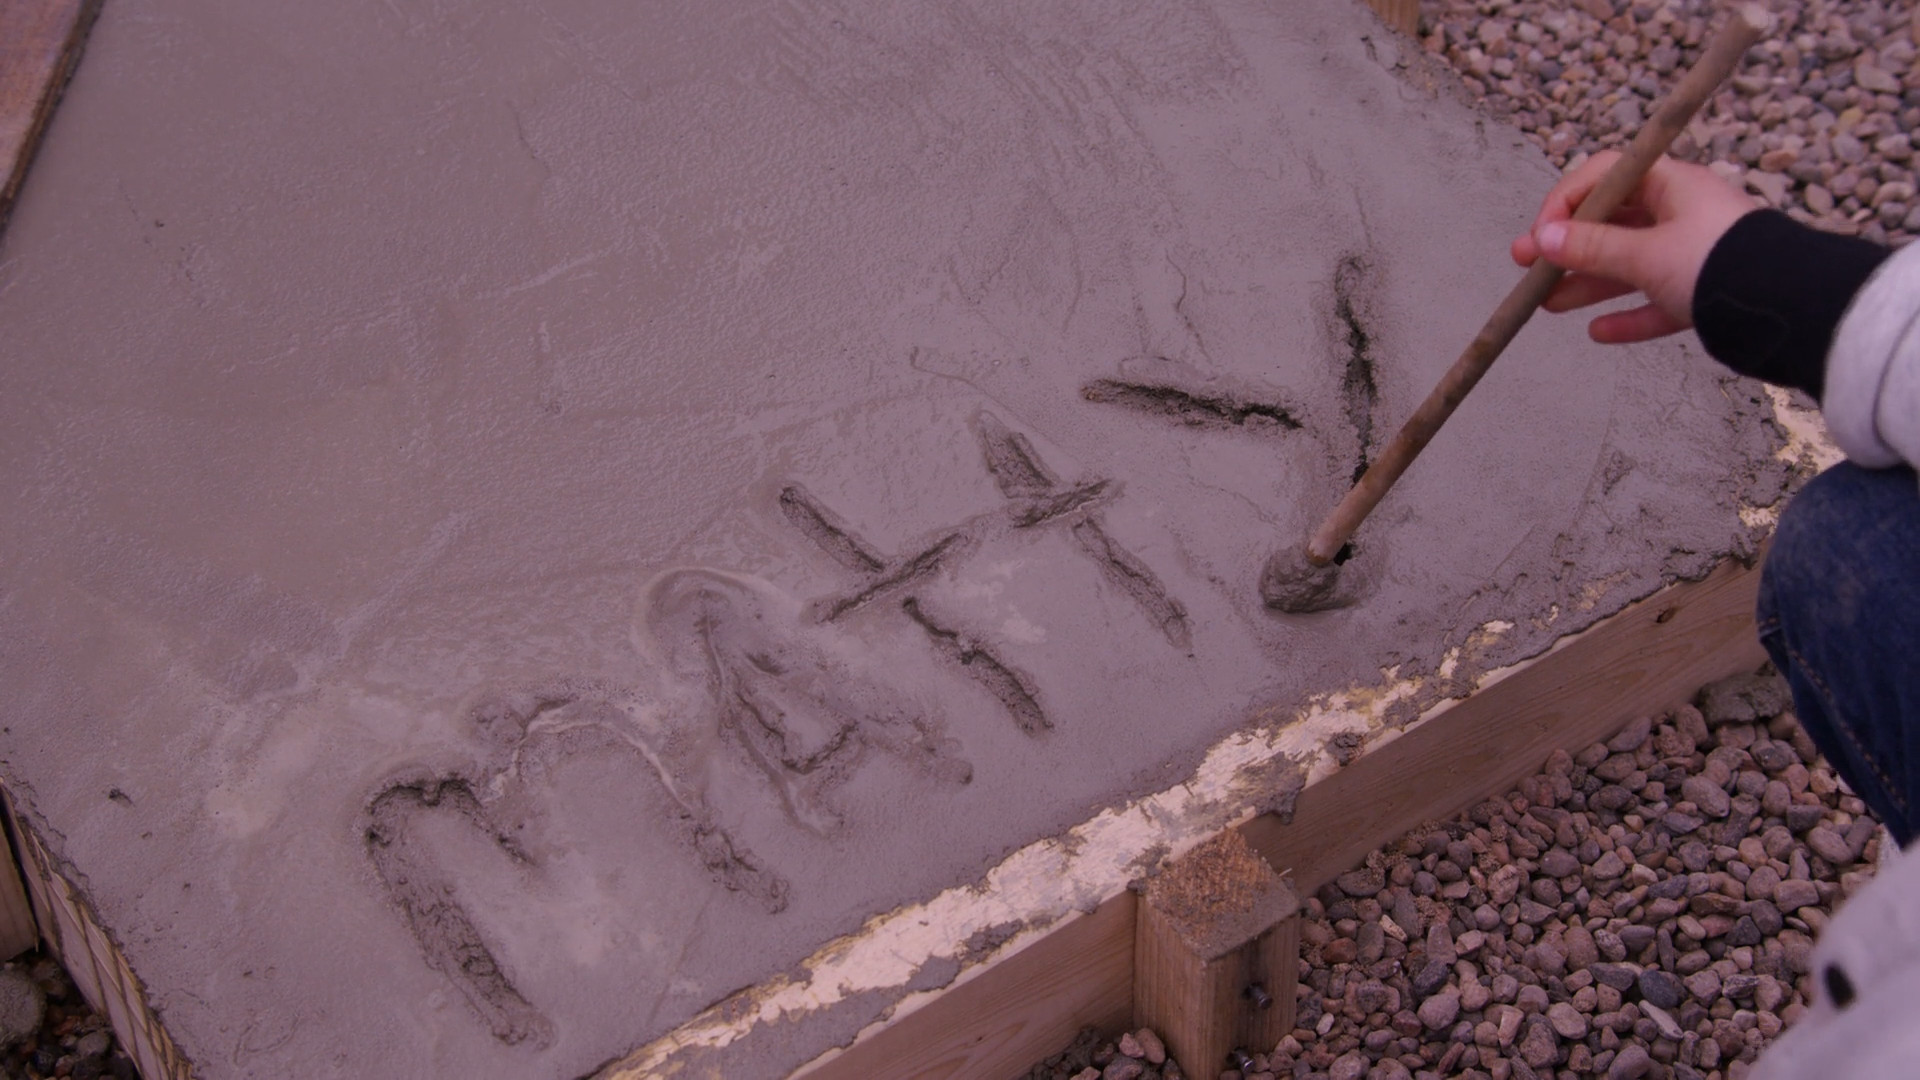 Mike's son writes his name in wet cement